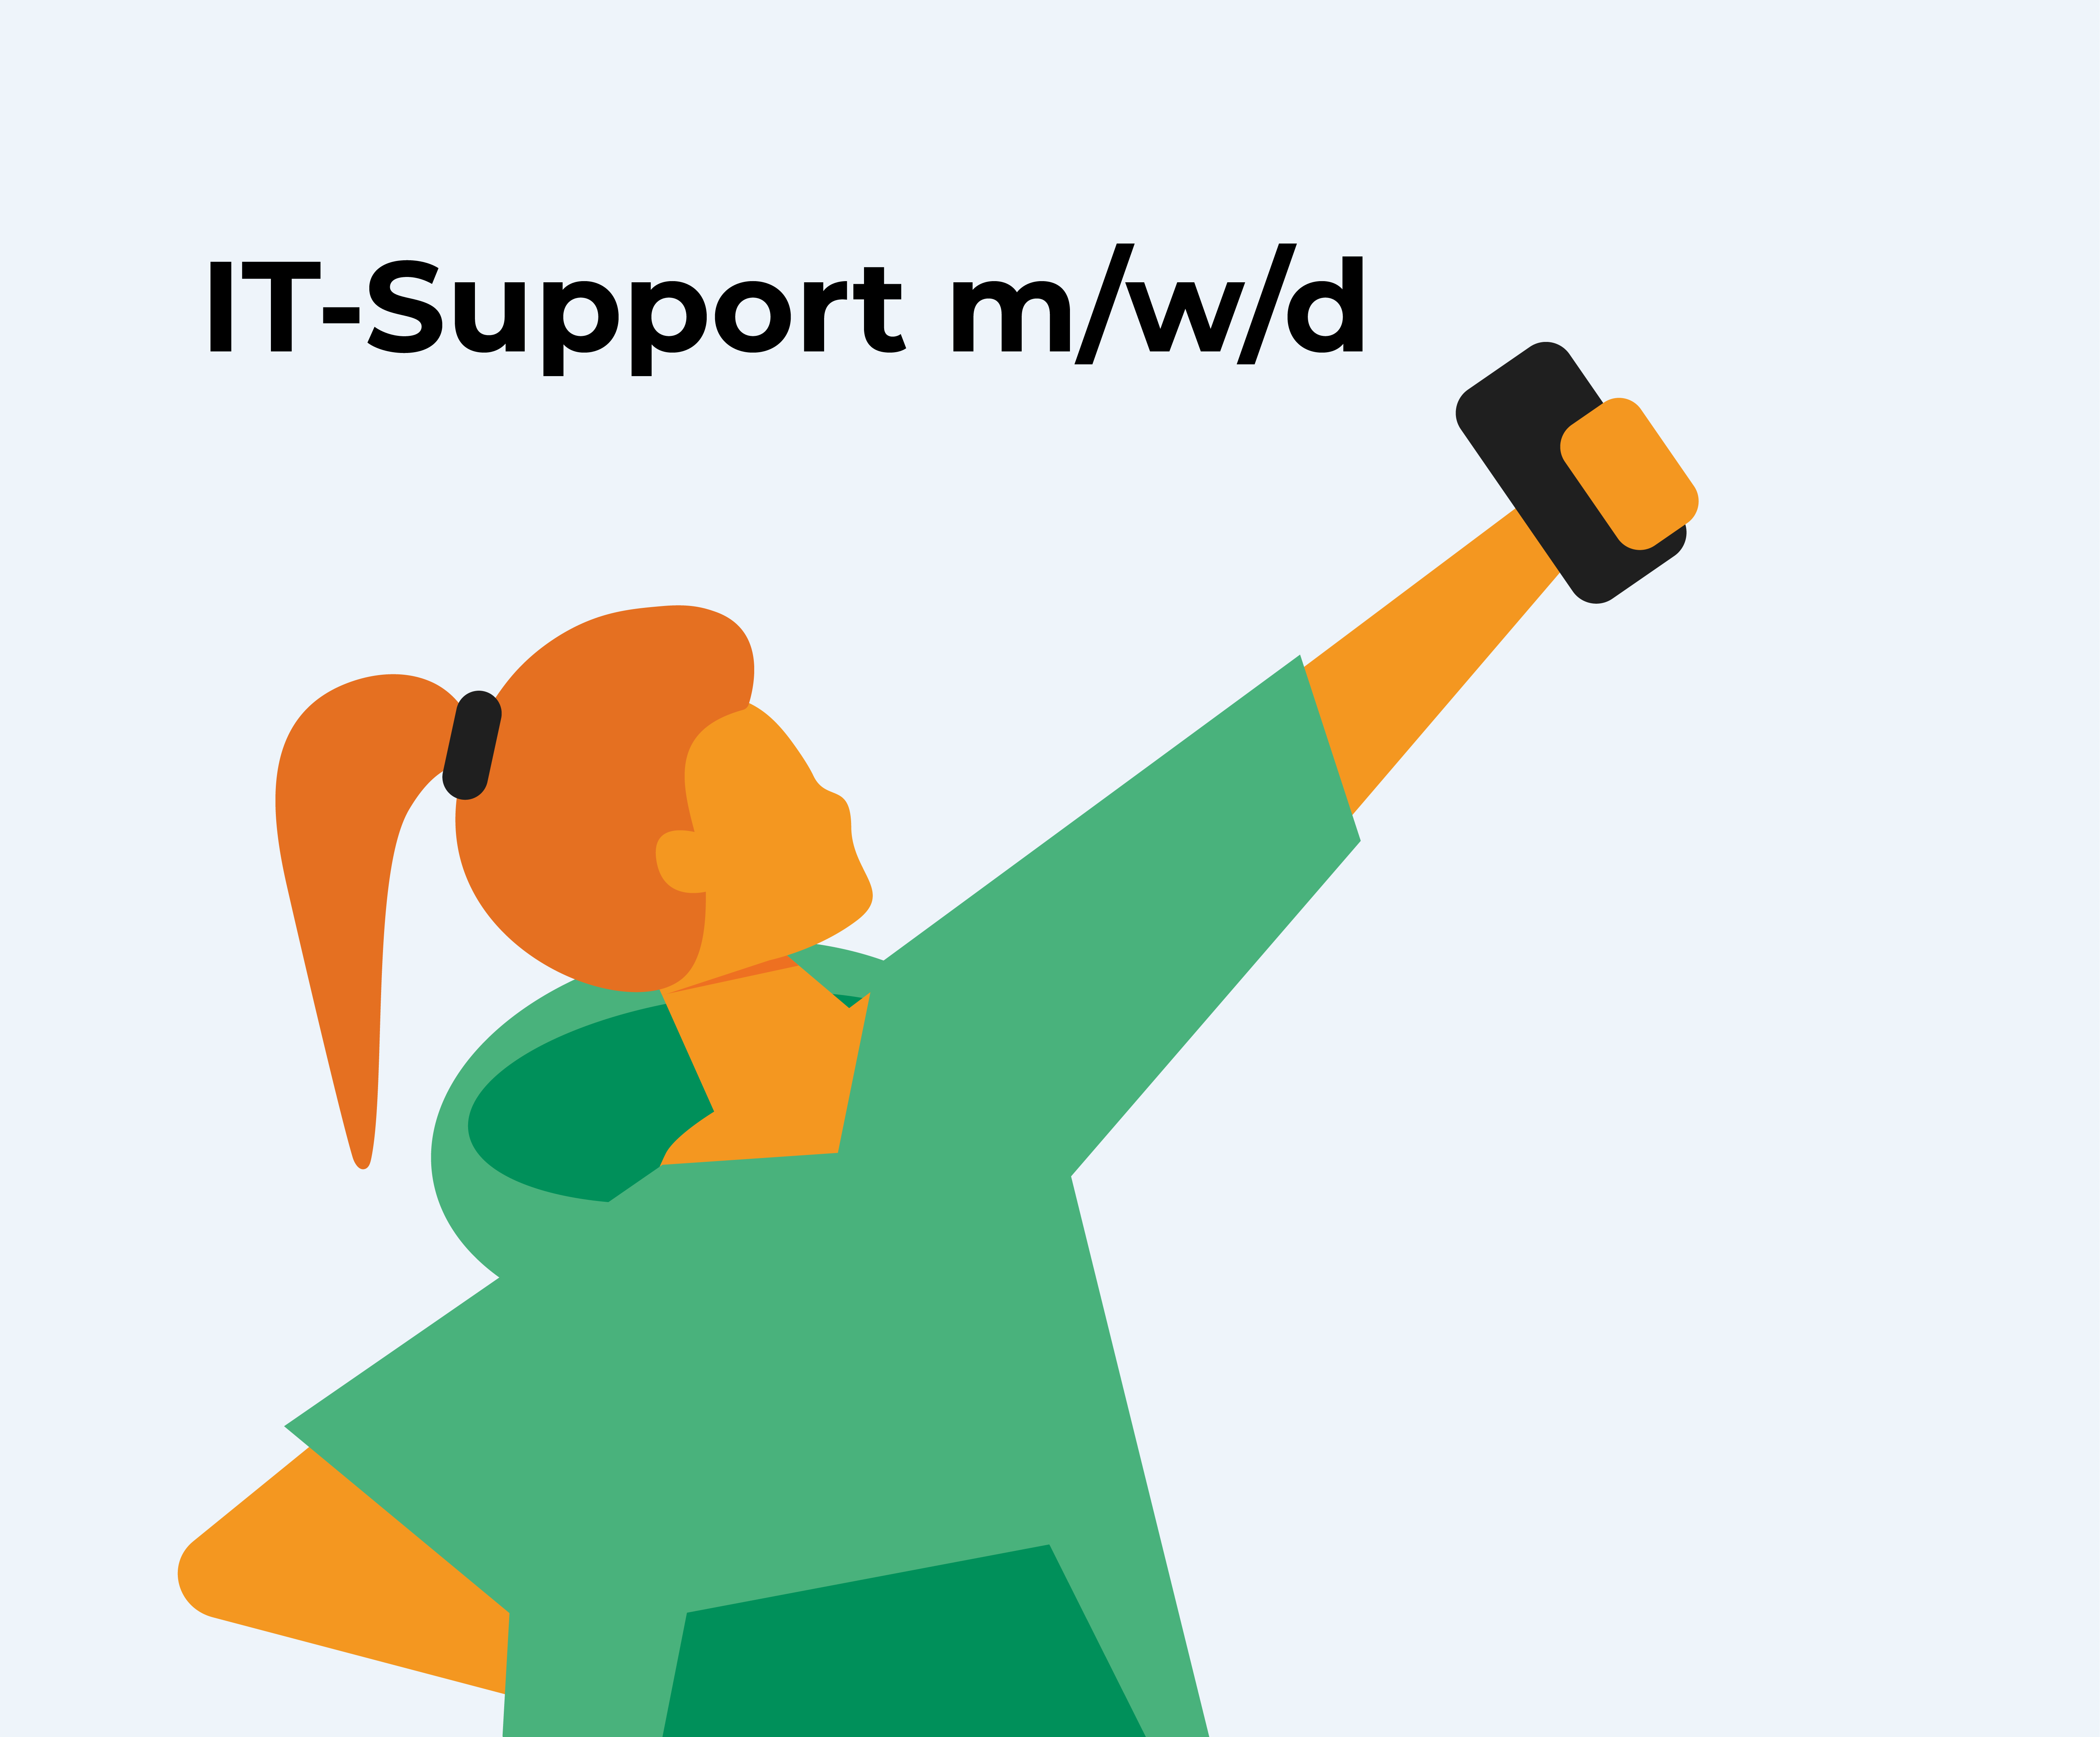 IT-Support m/w/d